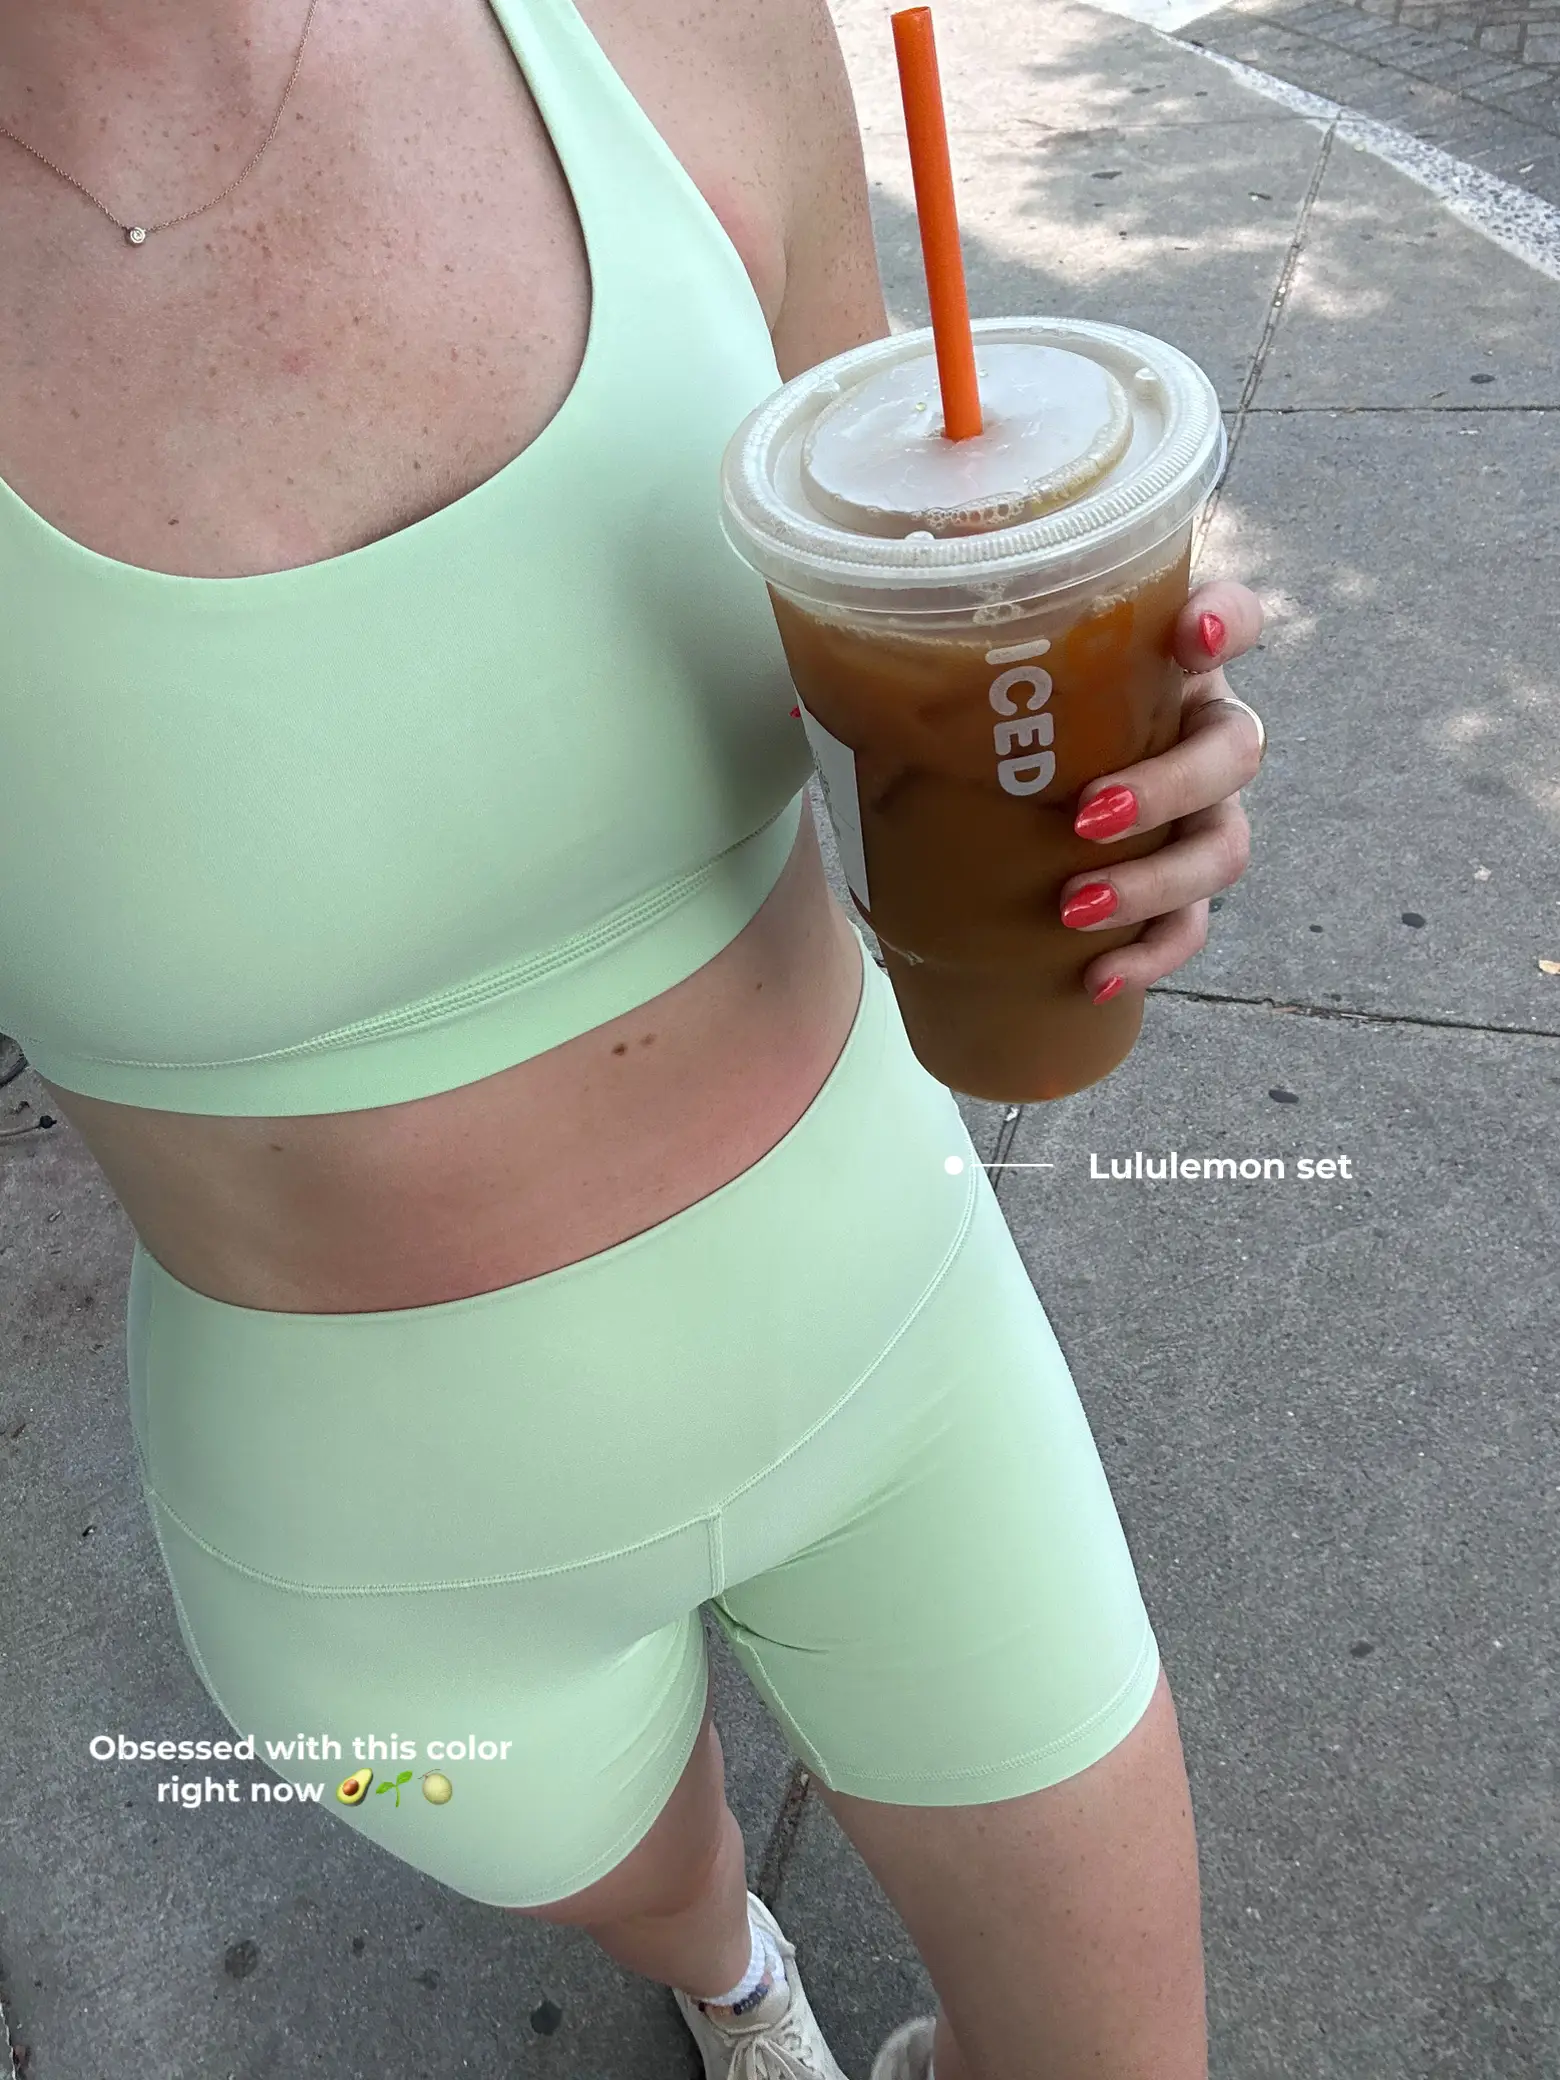  A woman wearing a green Lululemon set is holding a cup of iced coffee.